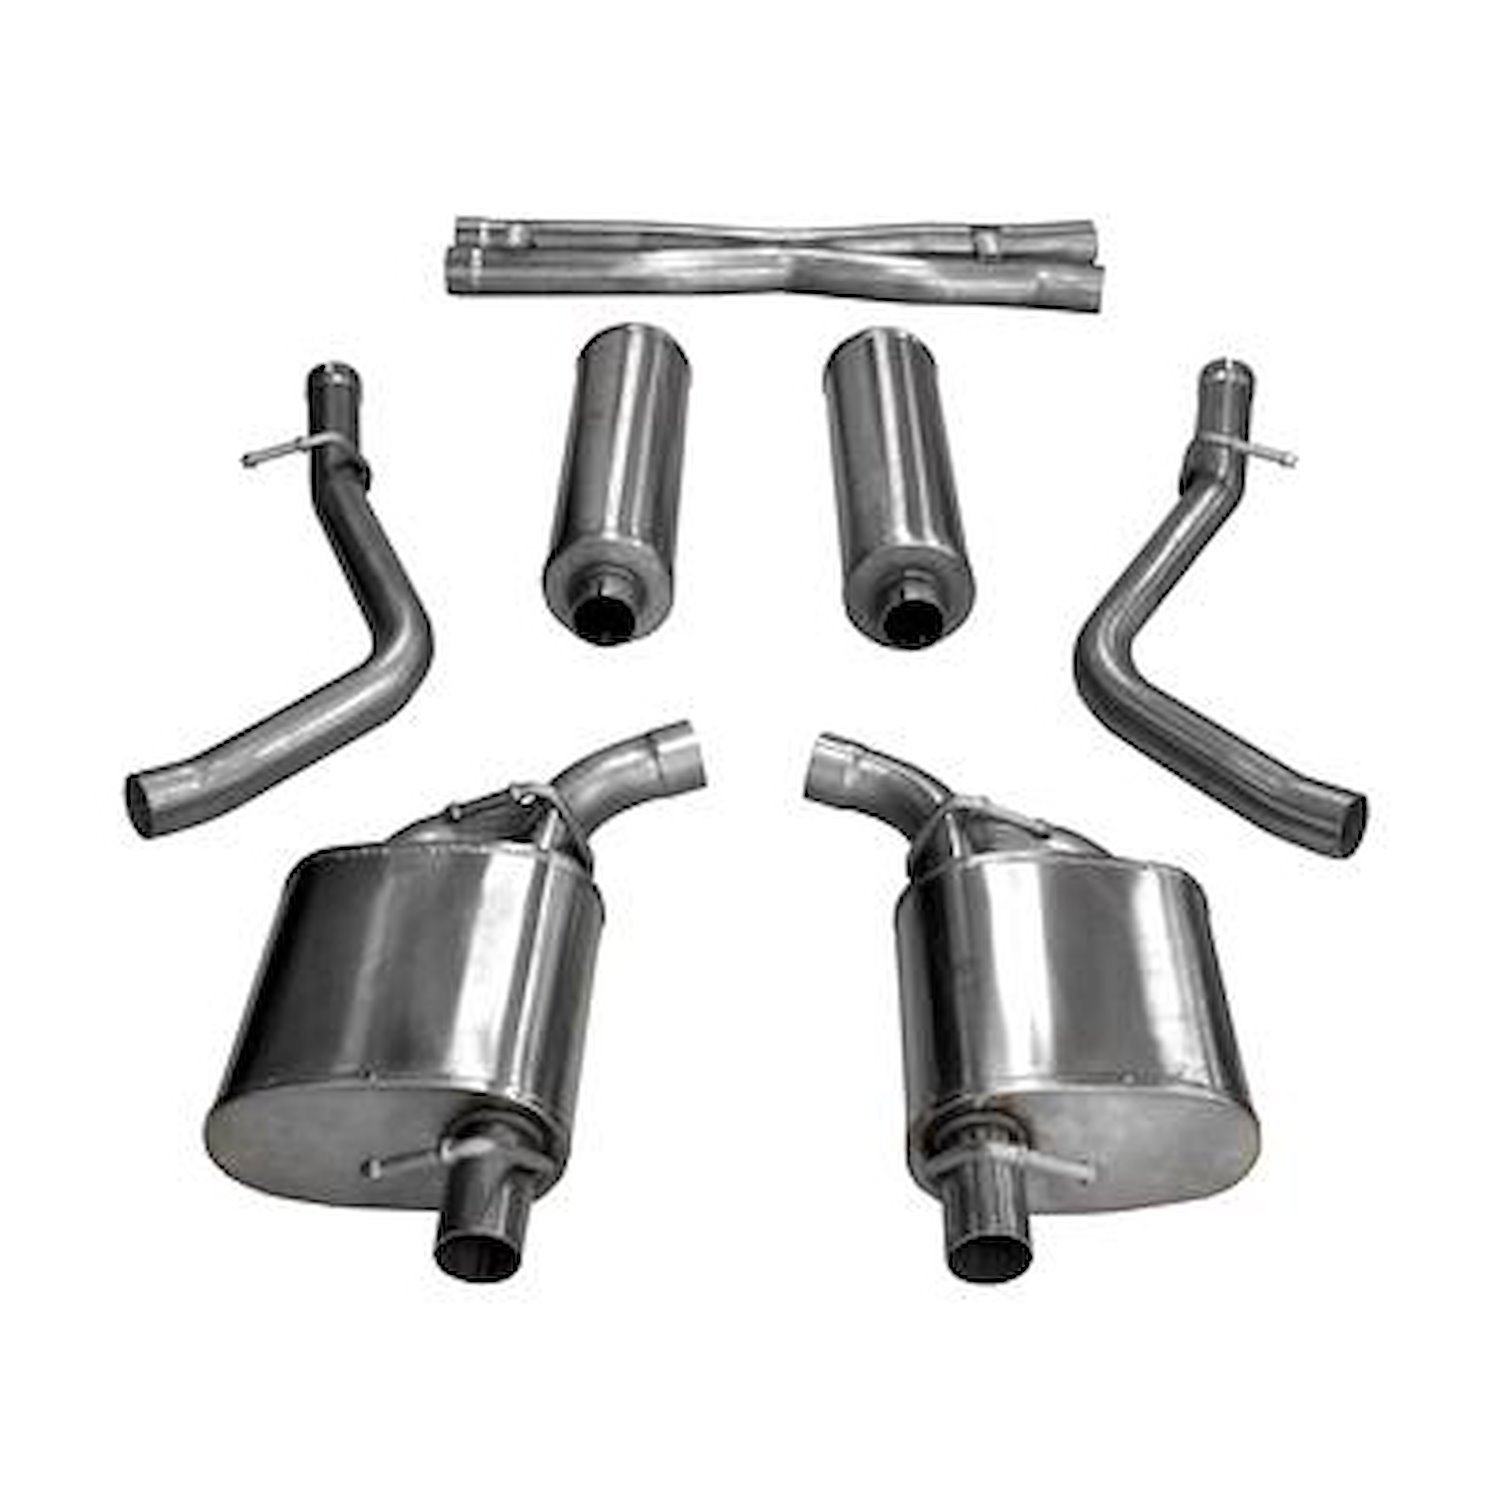 Sport Cat-Back Exhaust System 2015-2016 Dodge Charge RT 5.7L & 2015-2017 Chrysler 300 5.7L